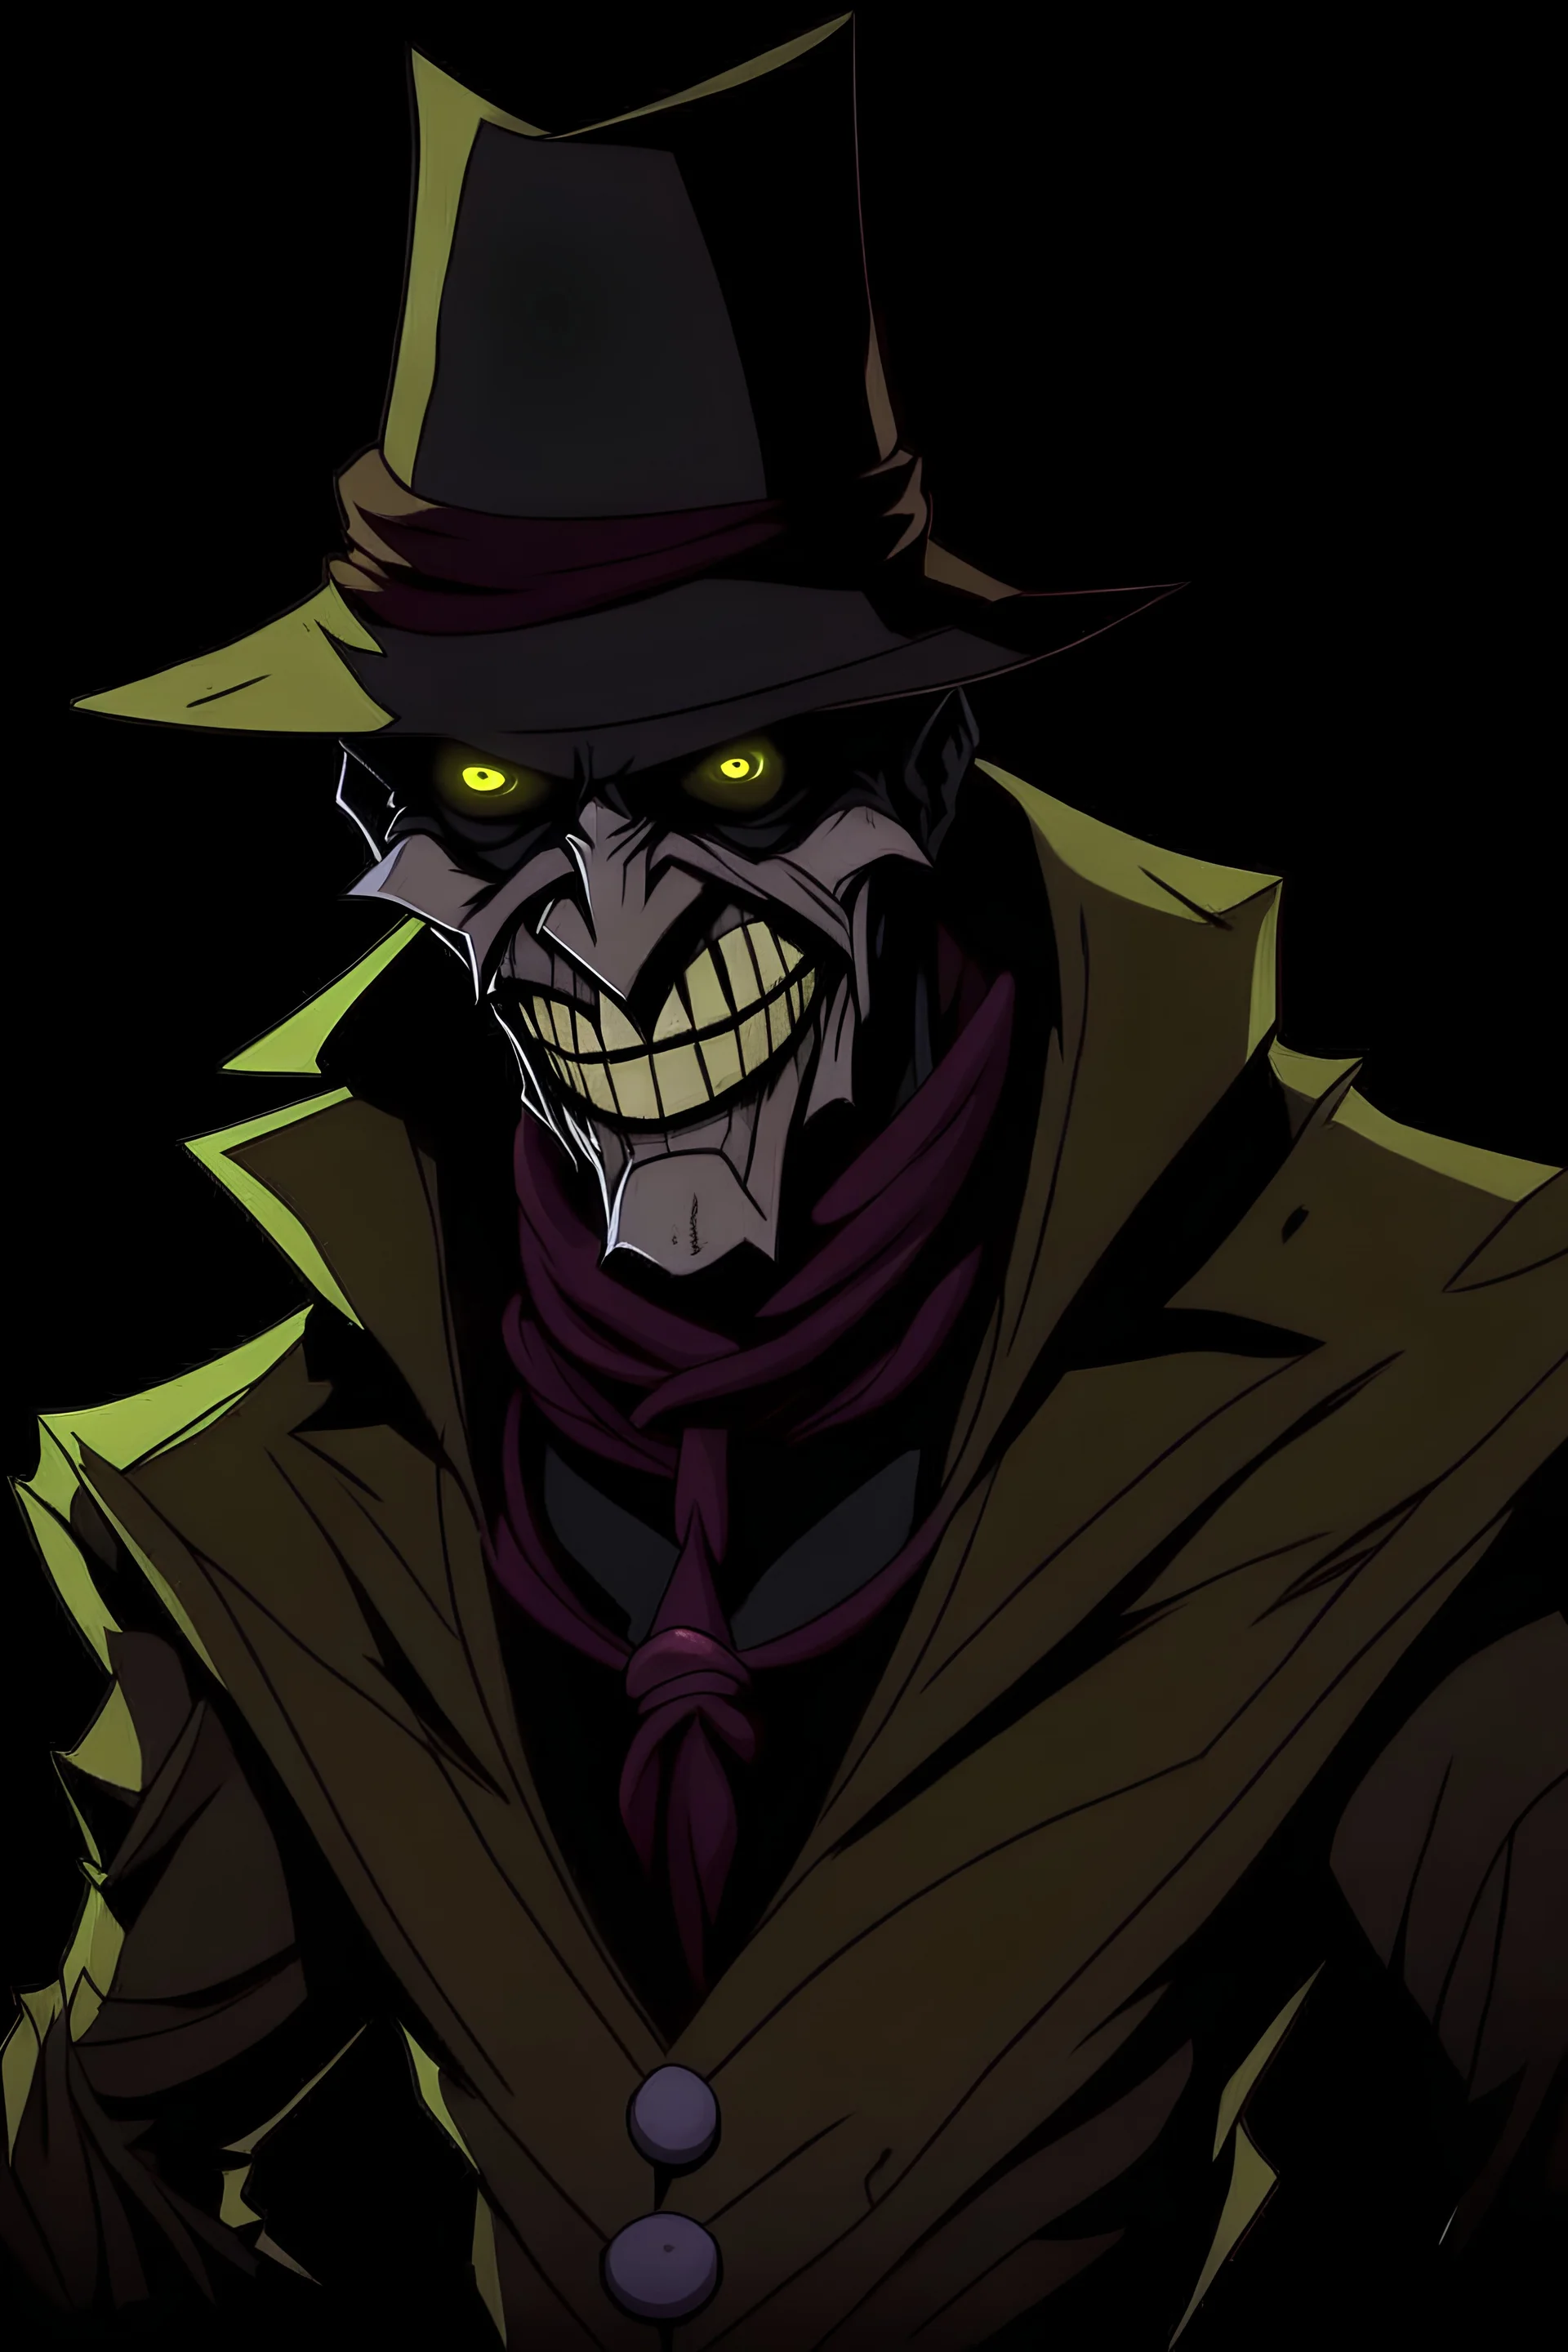 Image of a villain that looks like scarecrow and batman with purple eyes.